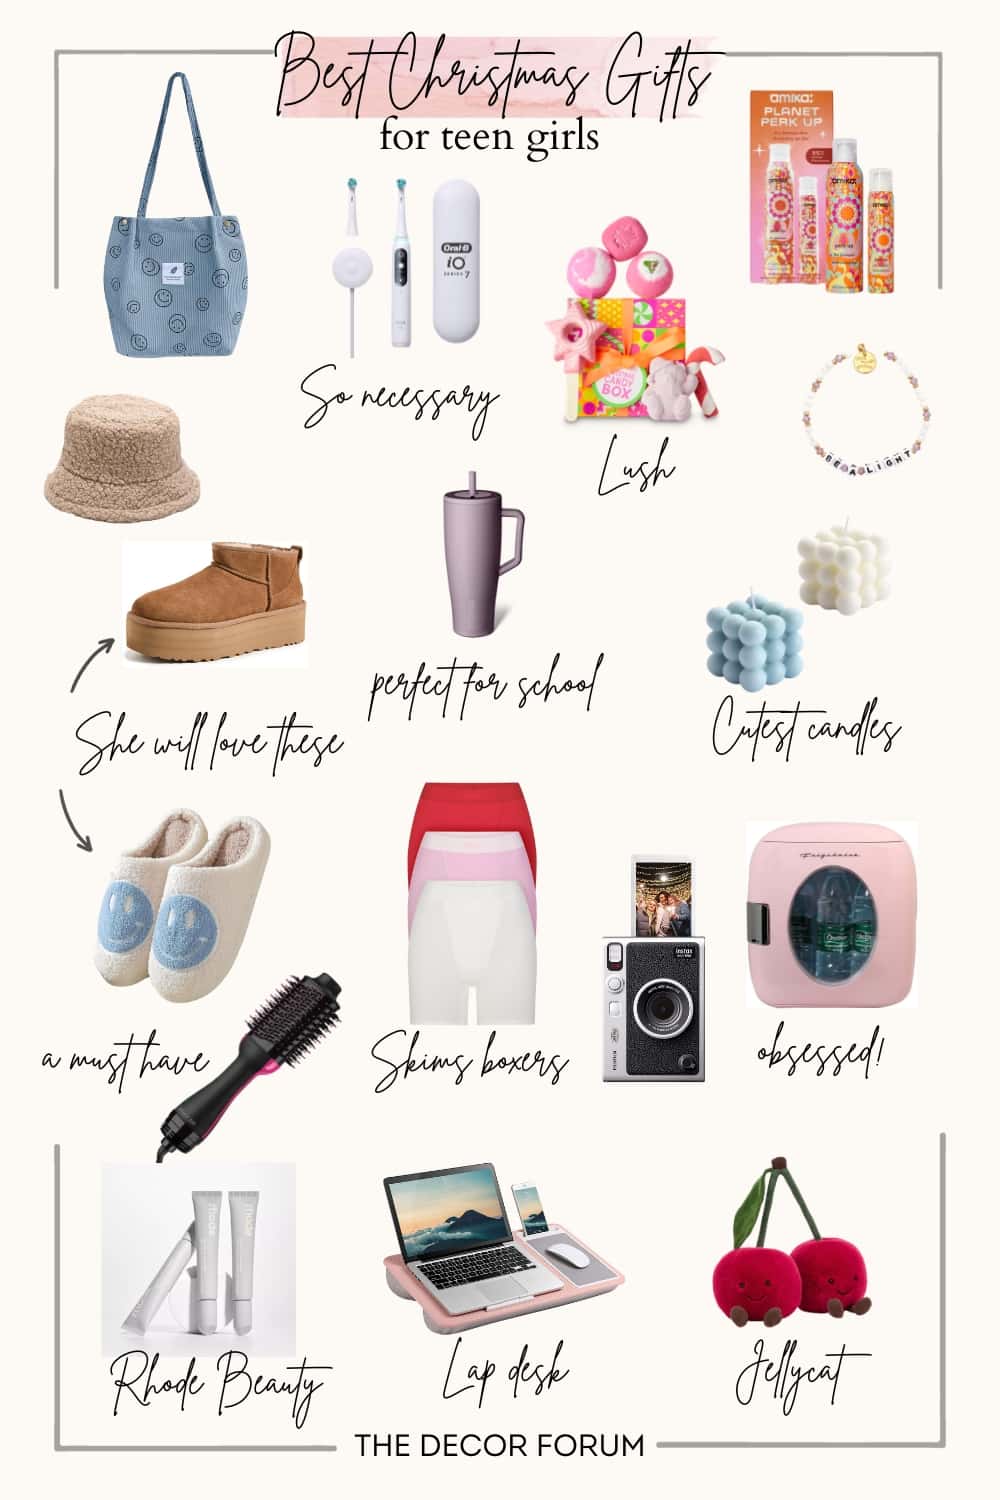 67 Best Christmas Gifts for Teen Girls That Will Make Her Love You